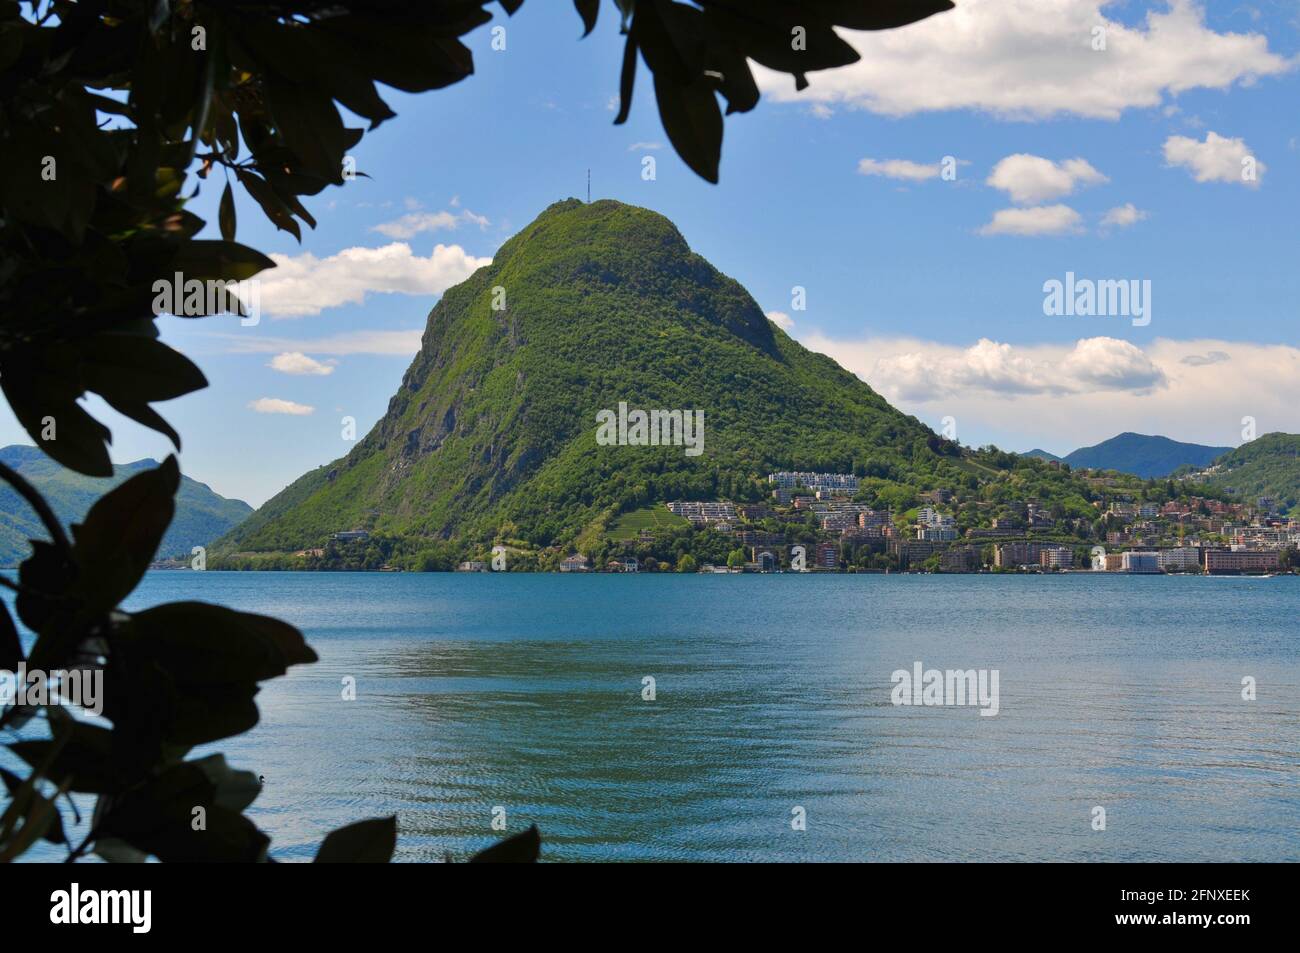 Lanscape view of the beautiful Monte San Salvatore (also known as Mount San Salvatore) and the lake Lugano on a sunny day Stock Photo